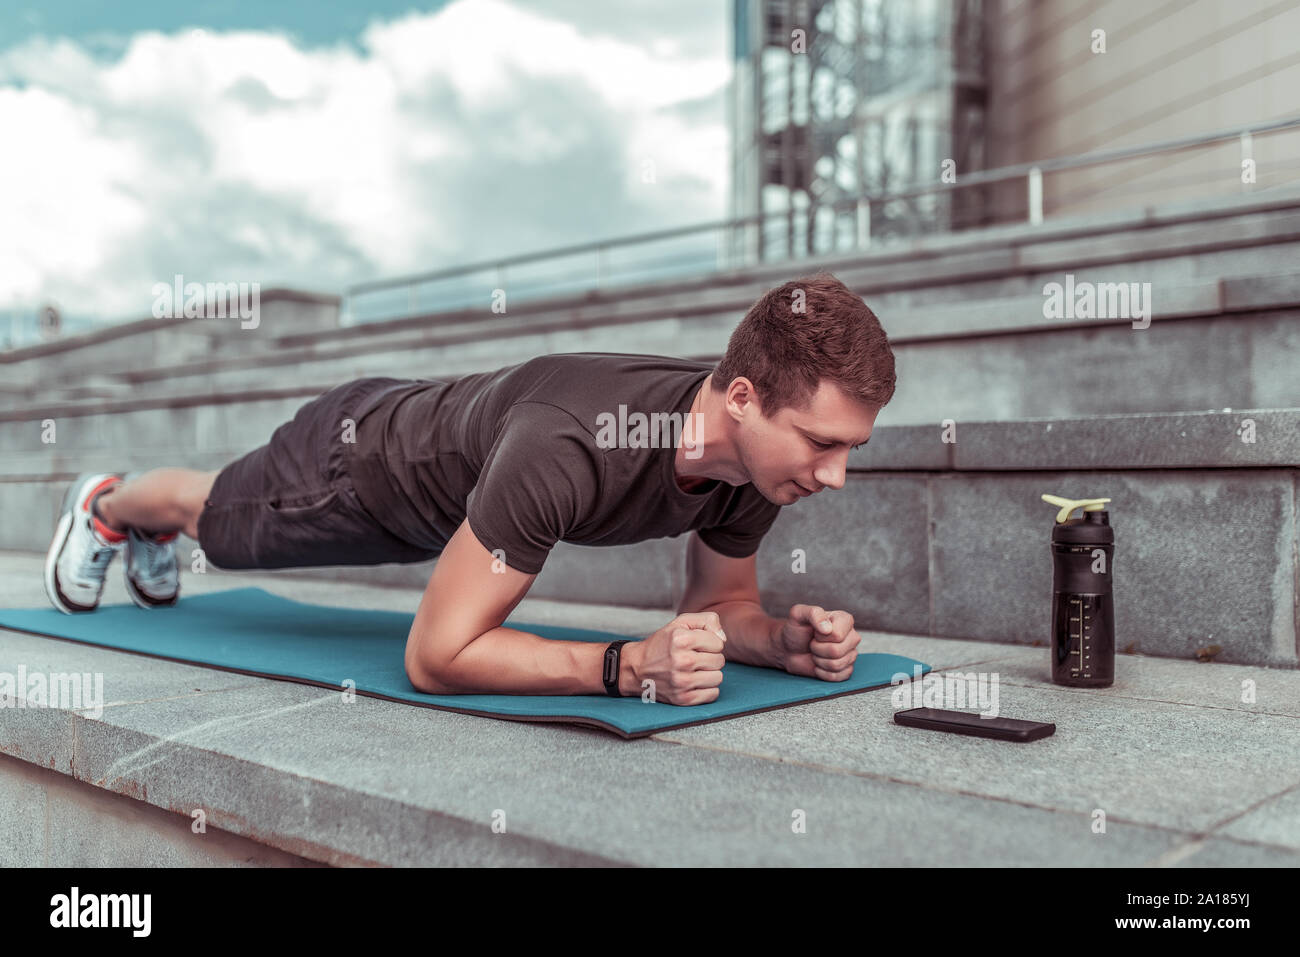 Man In Training Summer City Stands Emphasis Lying Down Plank Abs Training Abdominal Muscles Stretching Flexibility Looks Smartphone Application Stock Photo Alamy